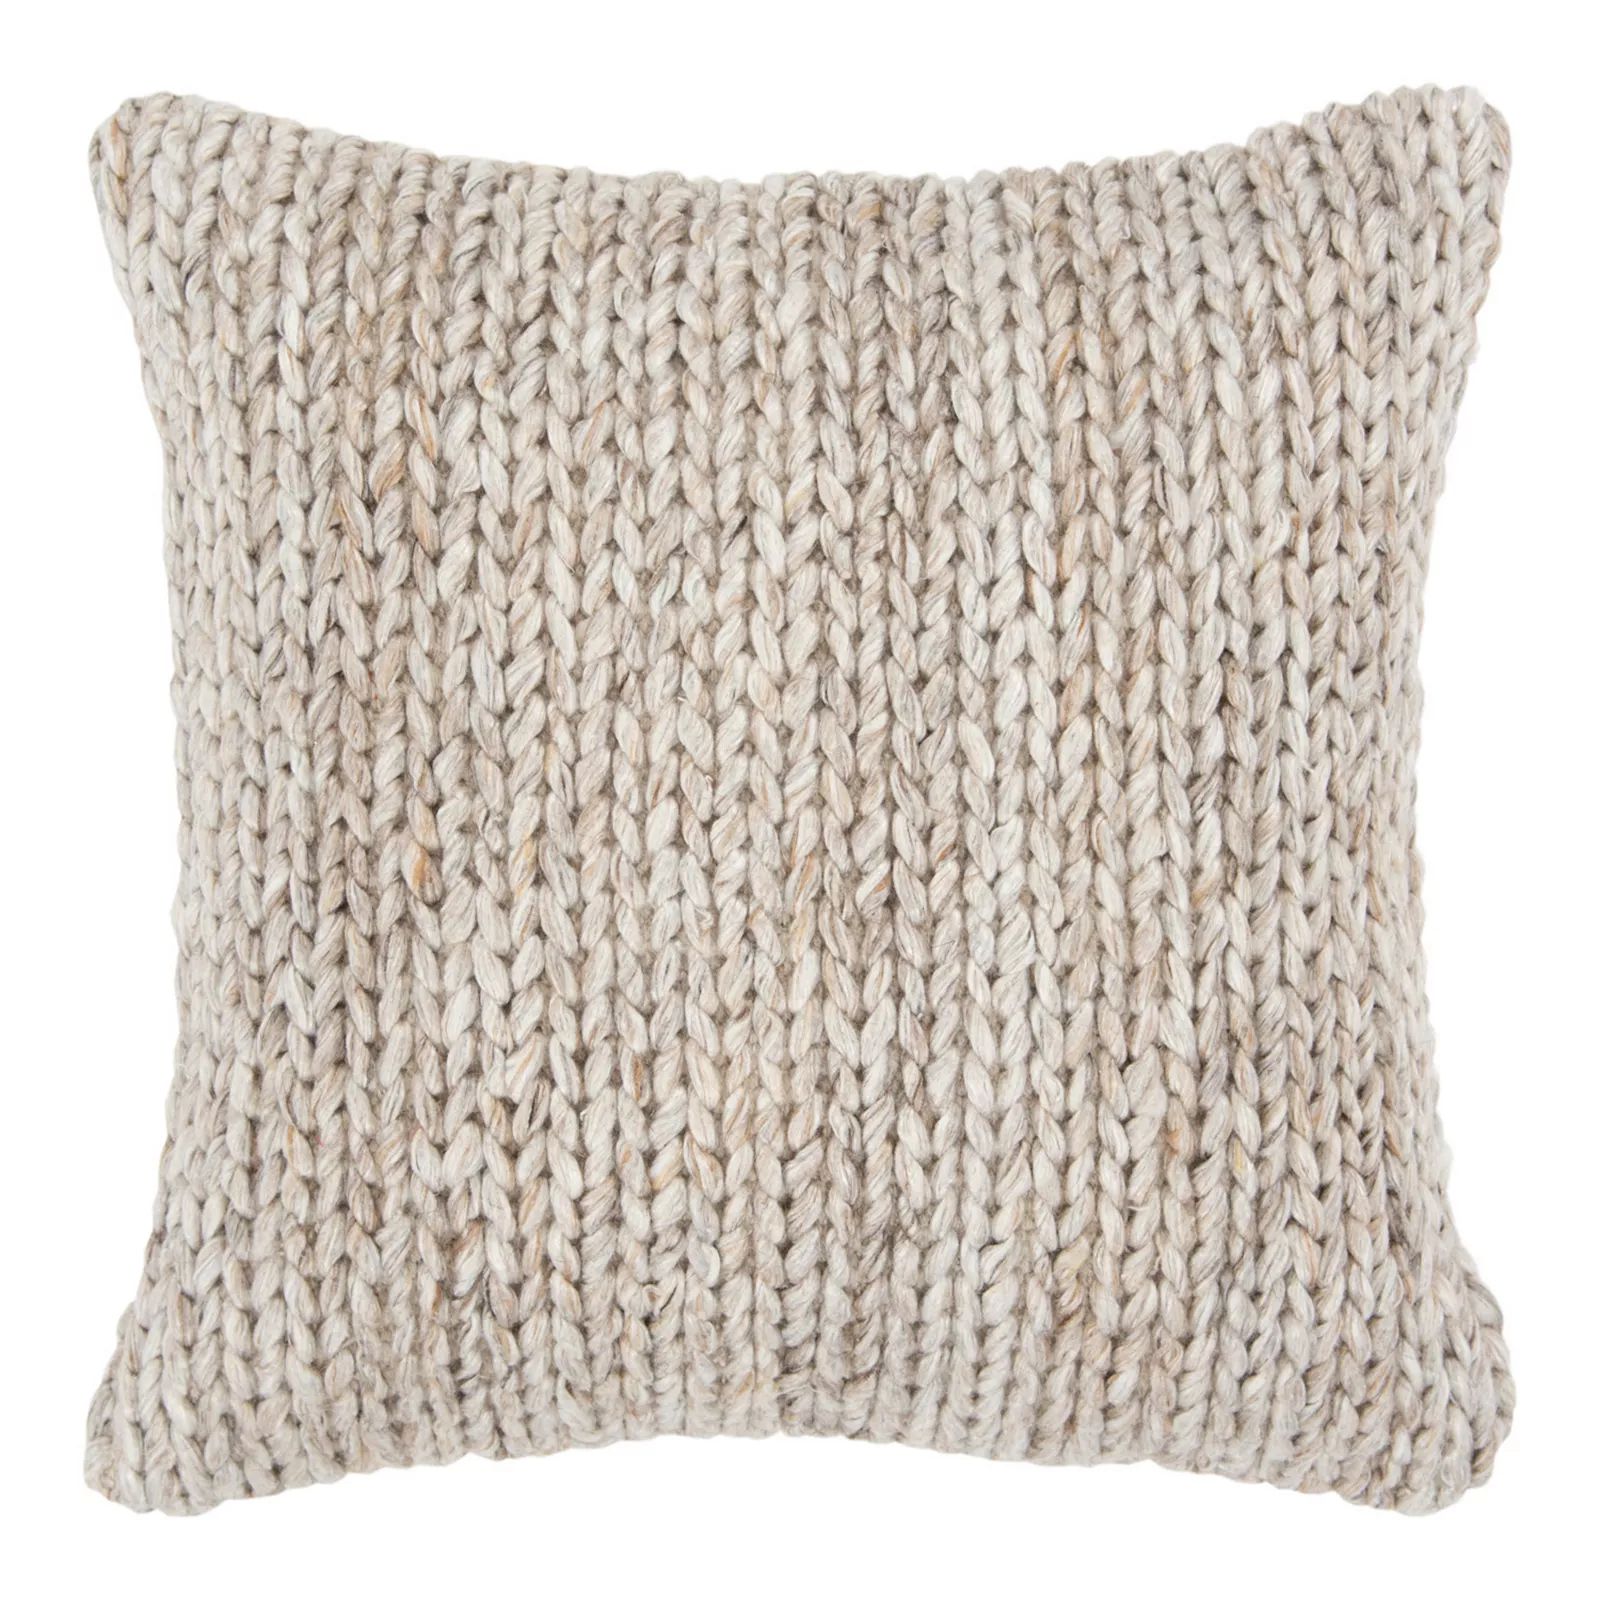 Rizzy Home Pamela Down Fill Throw Pillow, Natural, 20X20 | Kohl's